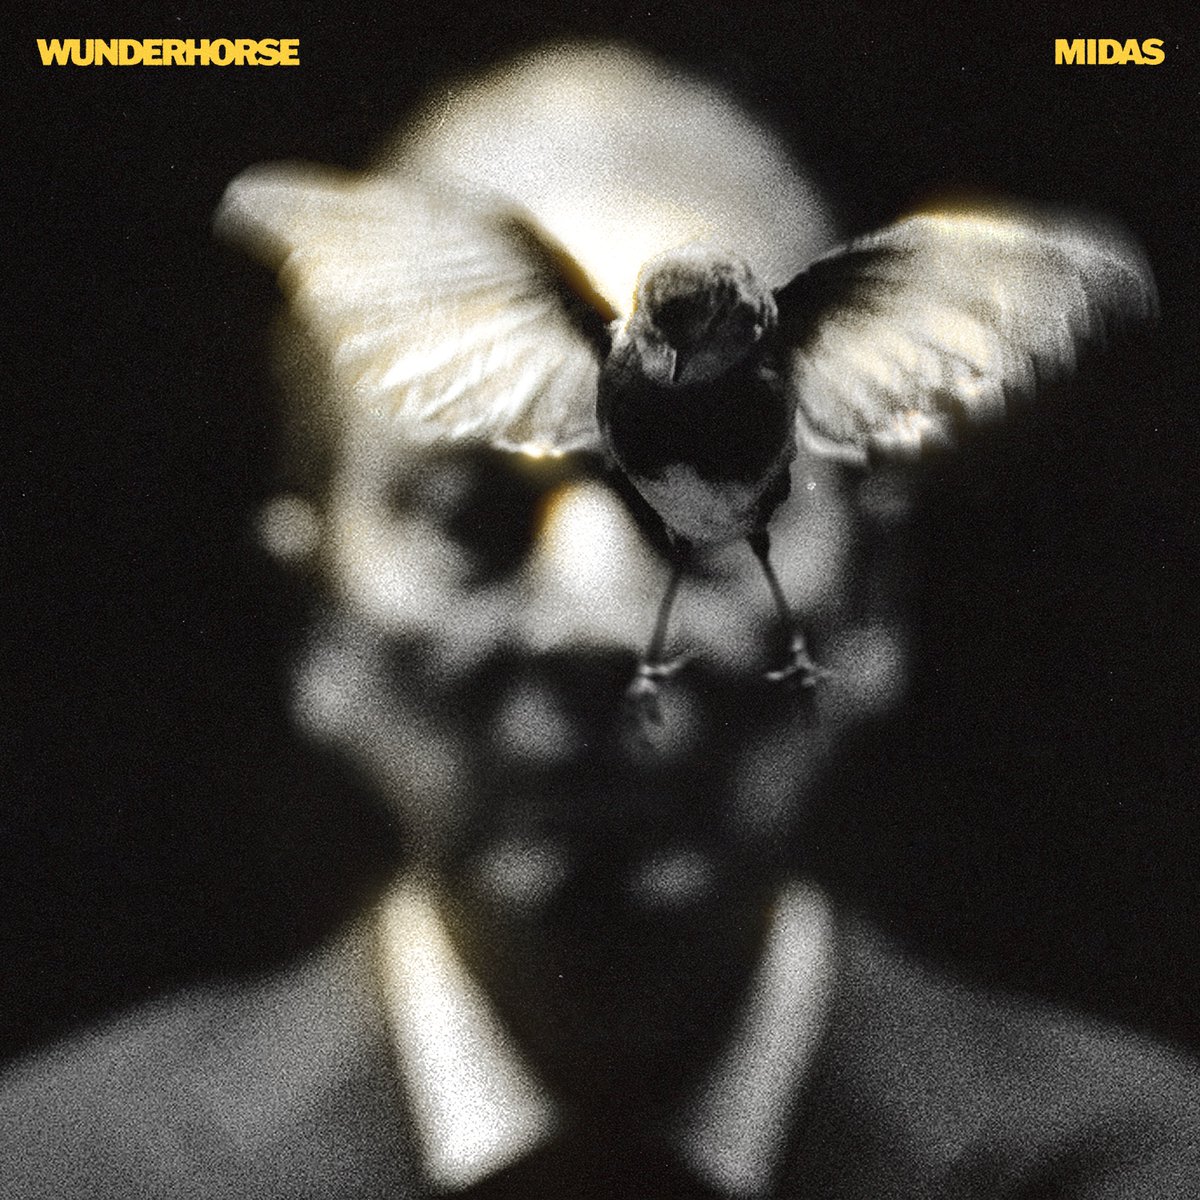 Midas. The new album. 30 August 2024. We hope you love it. WH x Pre-order the album at wunderhorseband.com for pre-sale access to our upcoming tour.